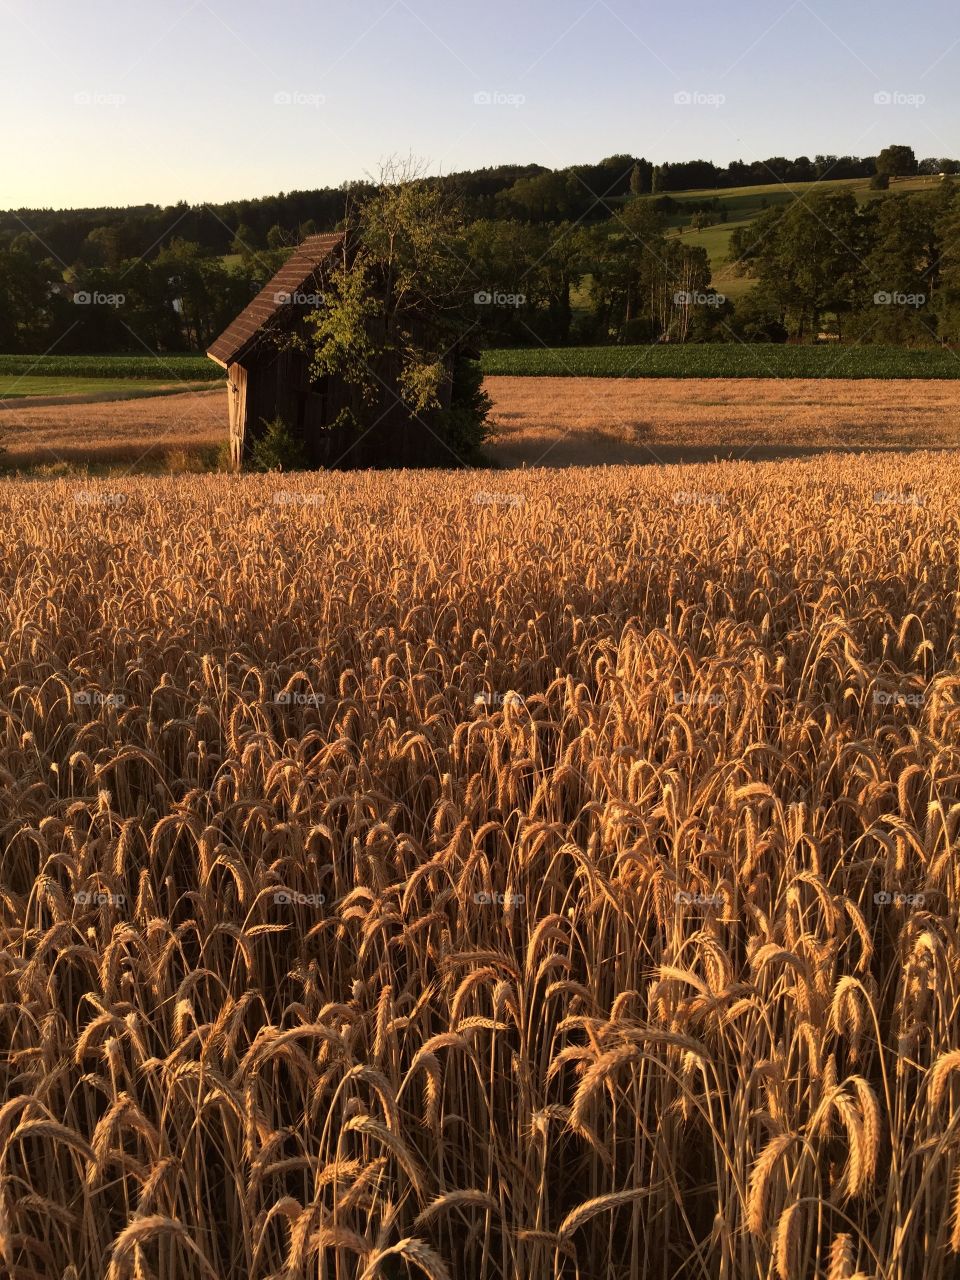 Golden hour in the cornfield. Golden Hour is the most beautiful time to go for a walk - the cornfield is close to the lake of Zurich.